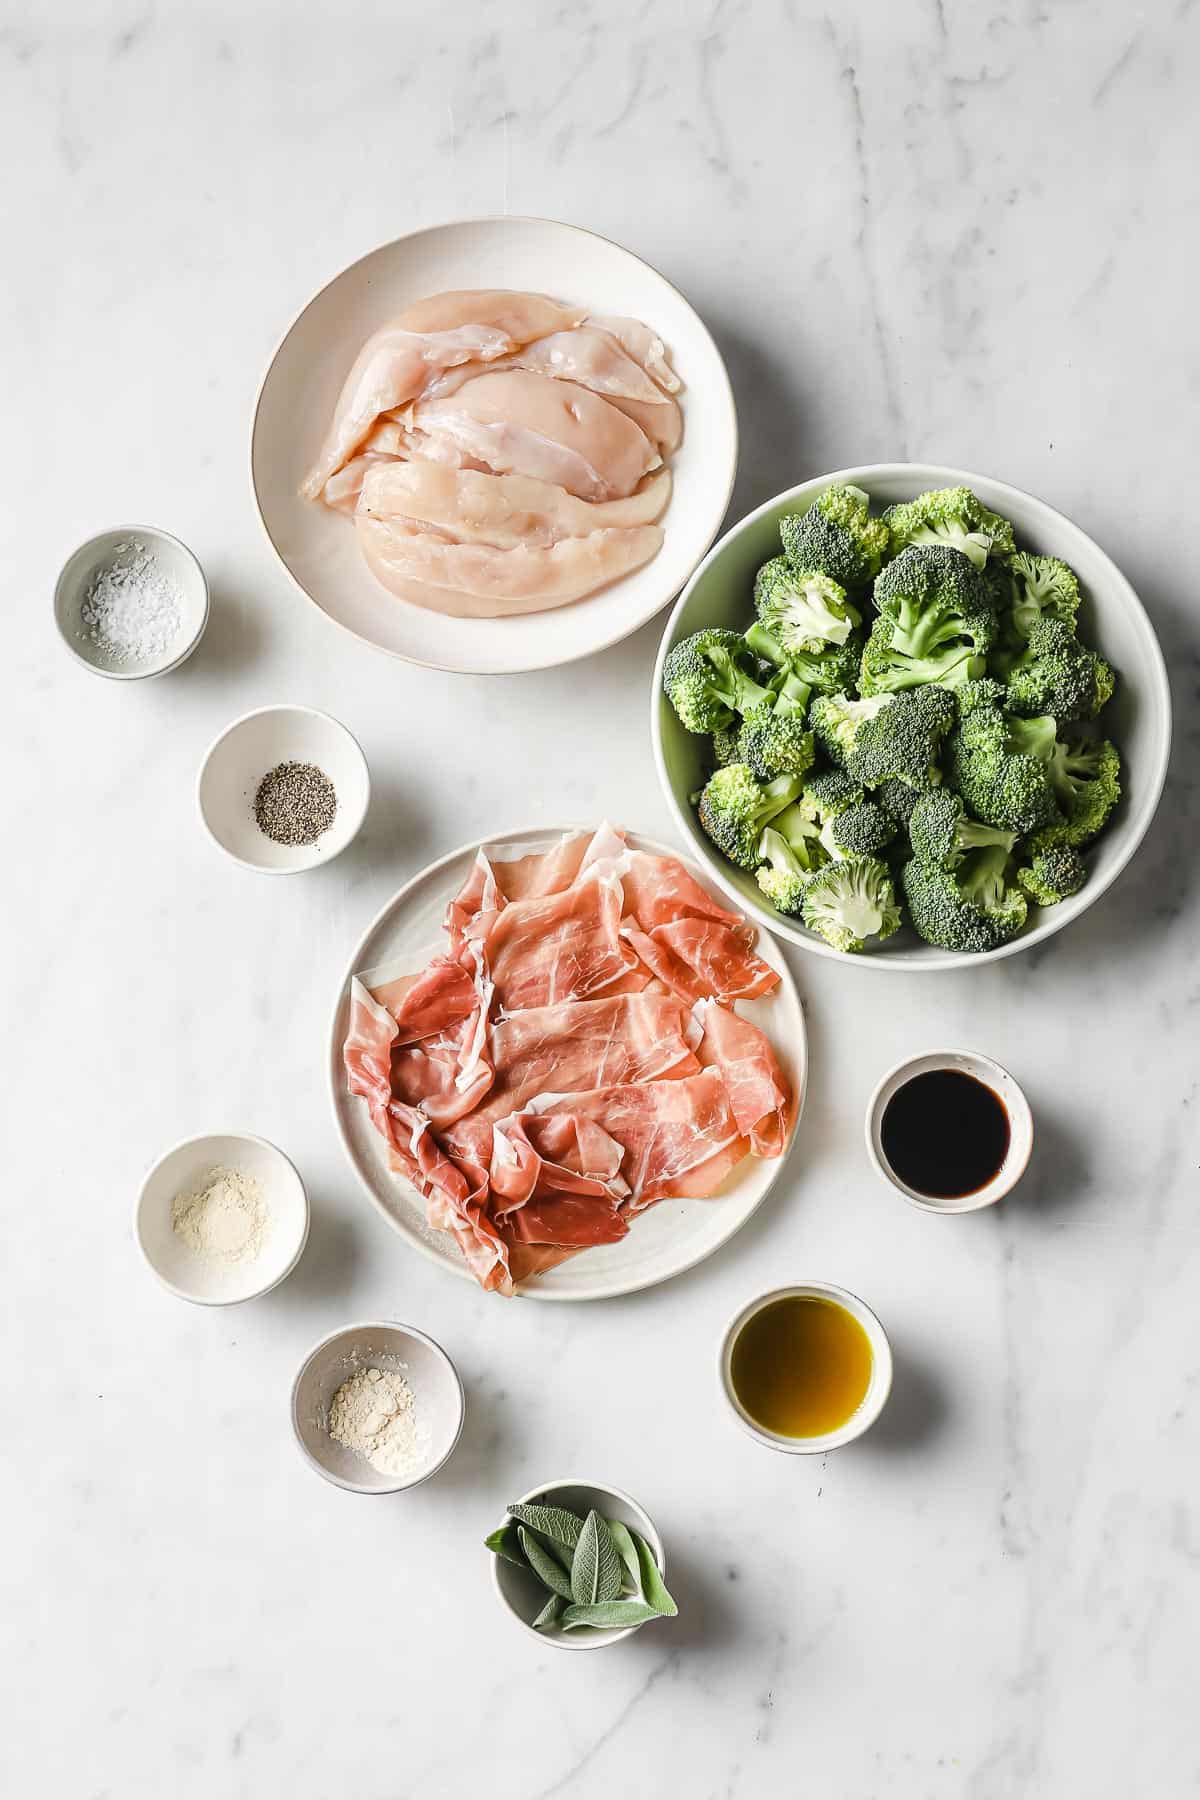 ingredients set out in individual bowls - chicken, prosciutto, broccoli, balsamic, olive oil, and seasonings.